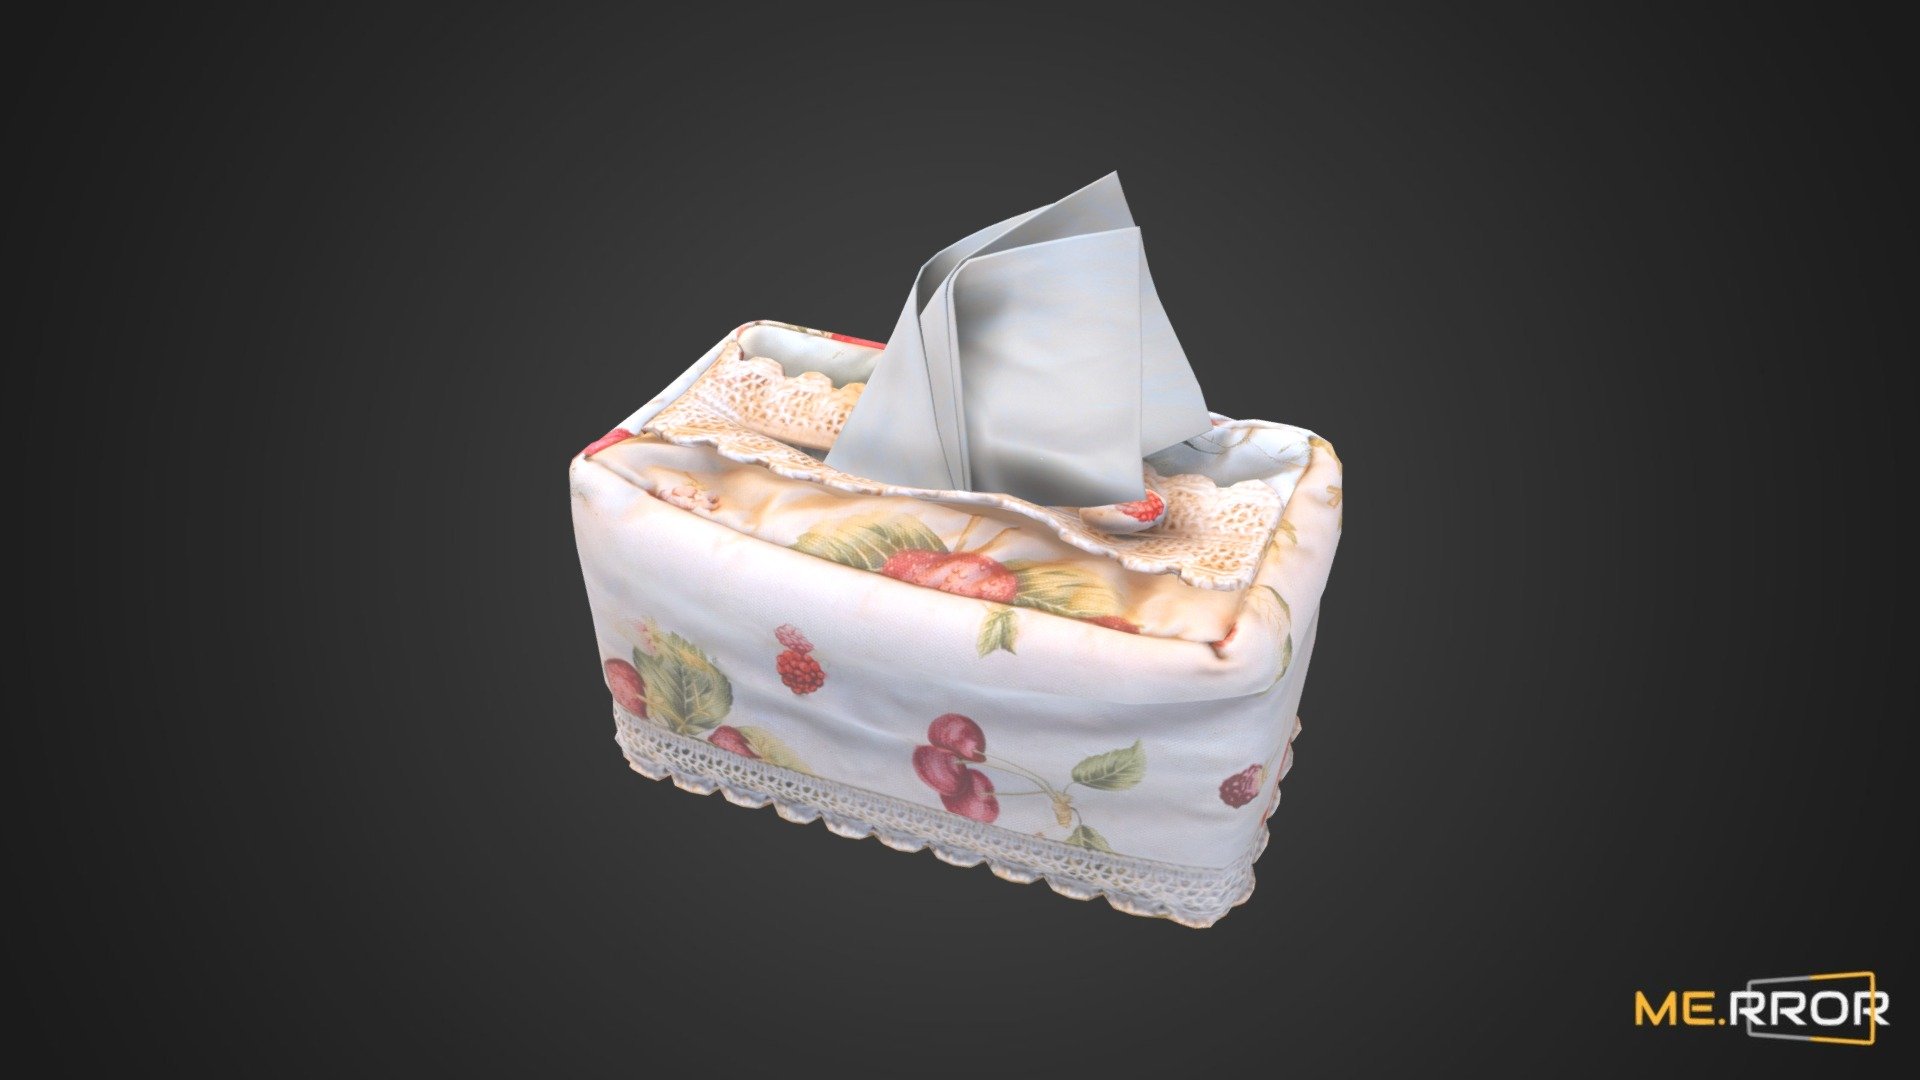 MERROR is a 3D Content PLATFORM which introduces various Asian assets to the 3D world


3DScanning #Photogrametry #ME.RROR - [Game-Ready] White Tissue - Buy Royalty Free 3D model by ME.RROR Studio (@merror) 3d model